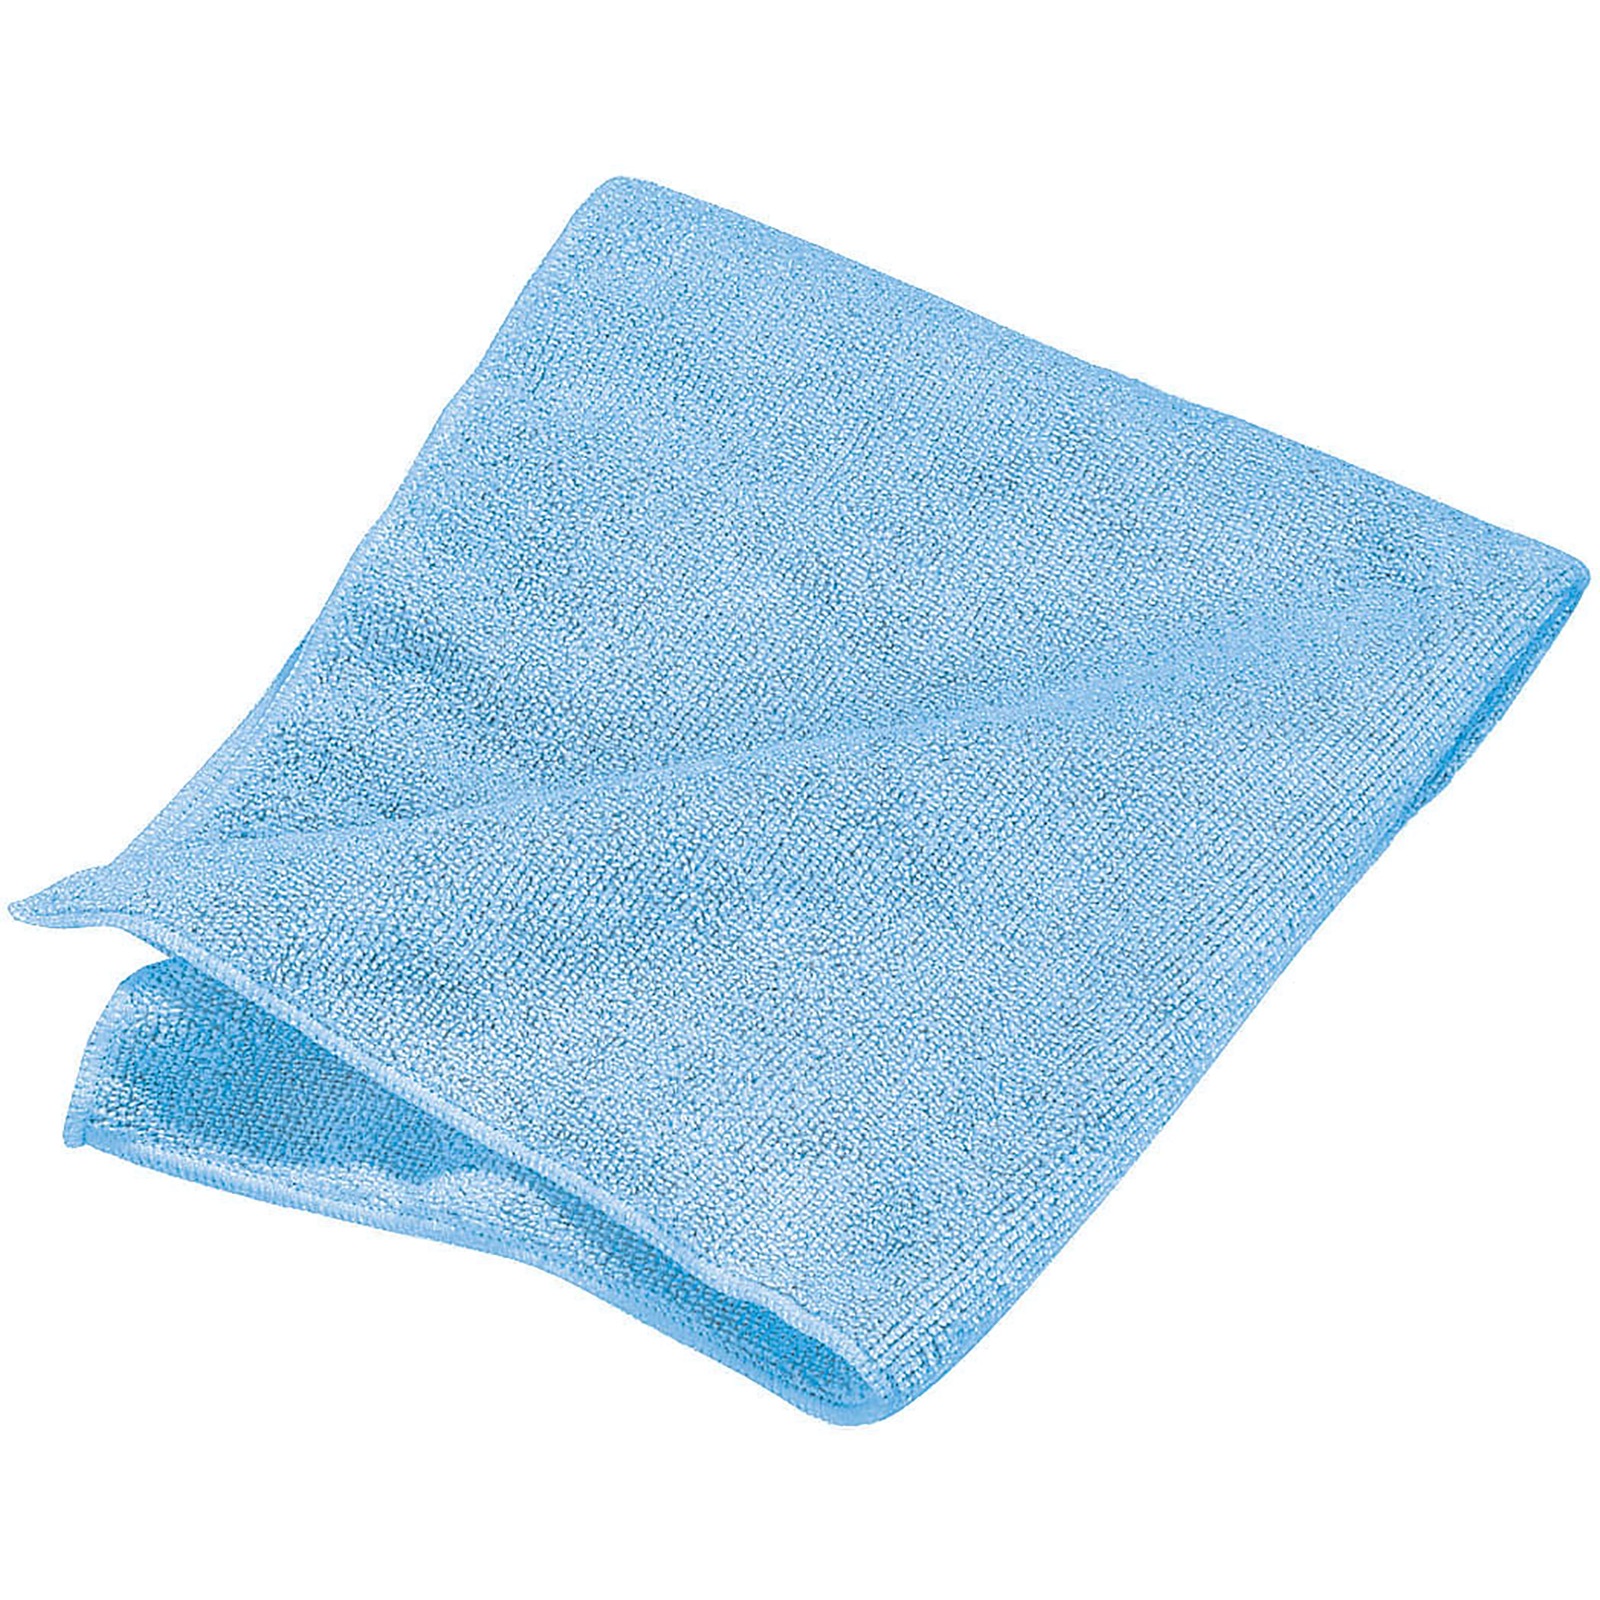 CLOTH CLEANING MICROFIBER 16X16 BLUE